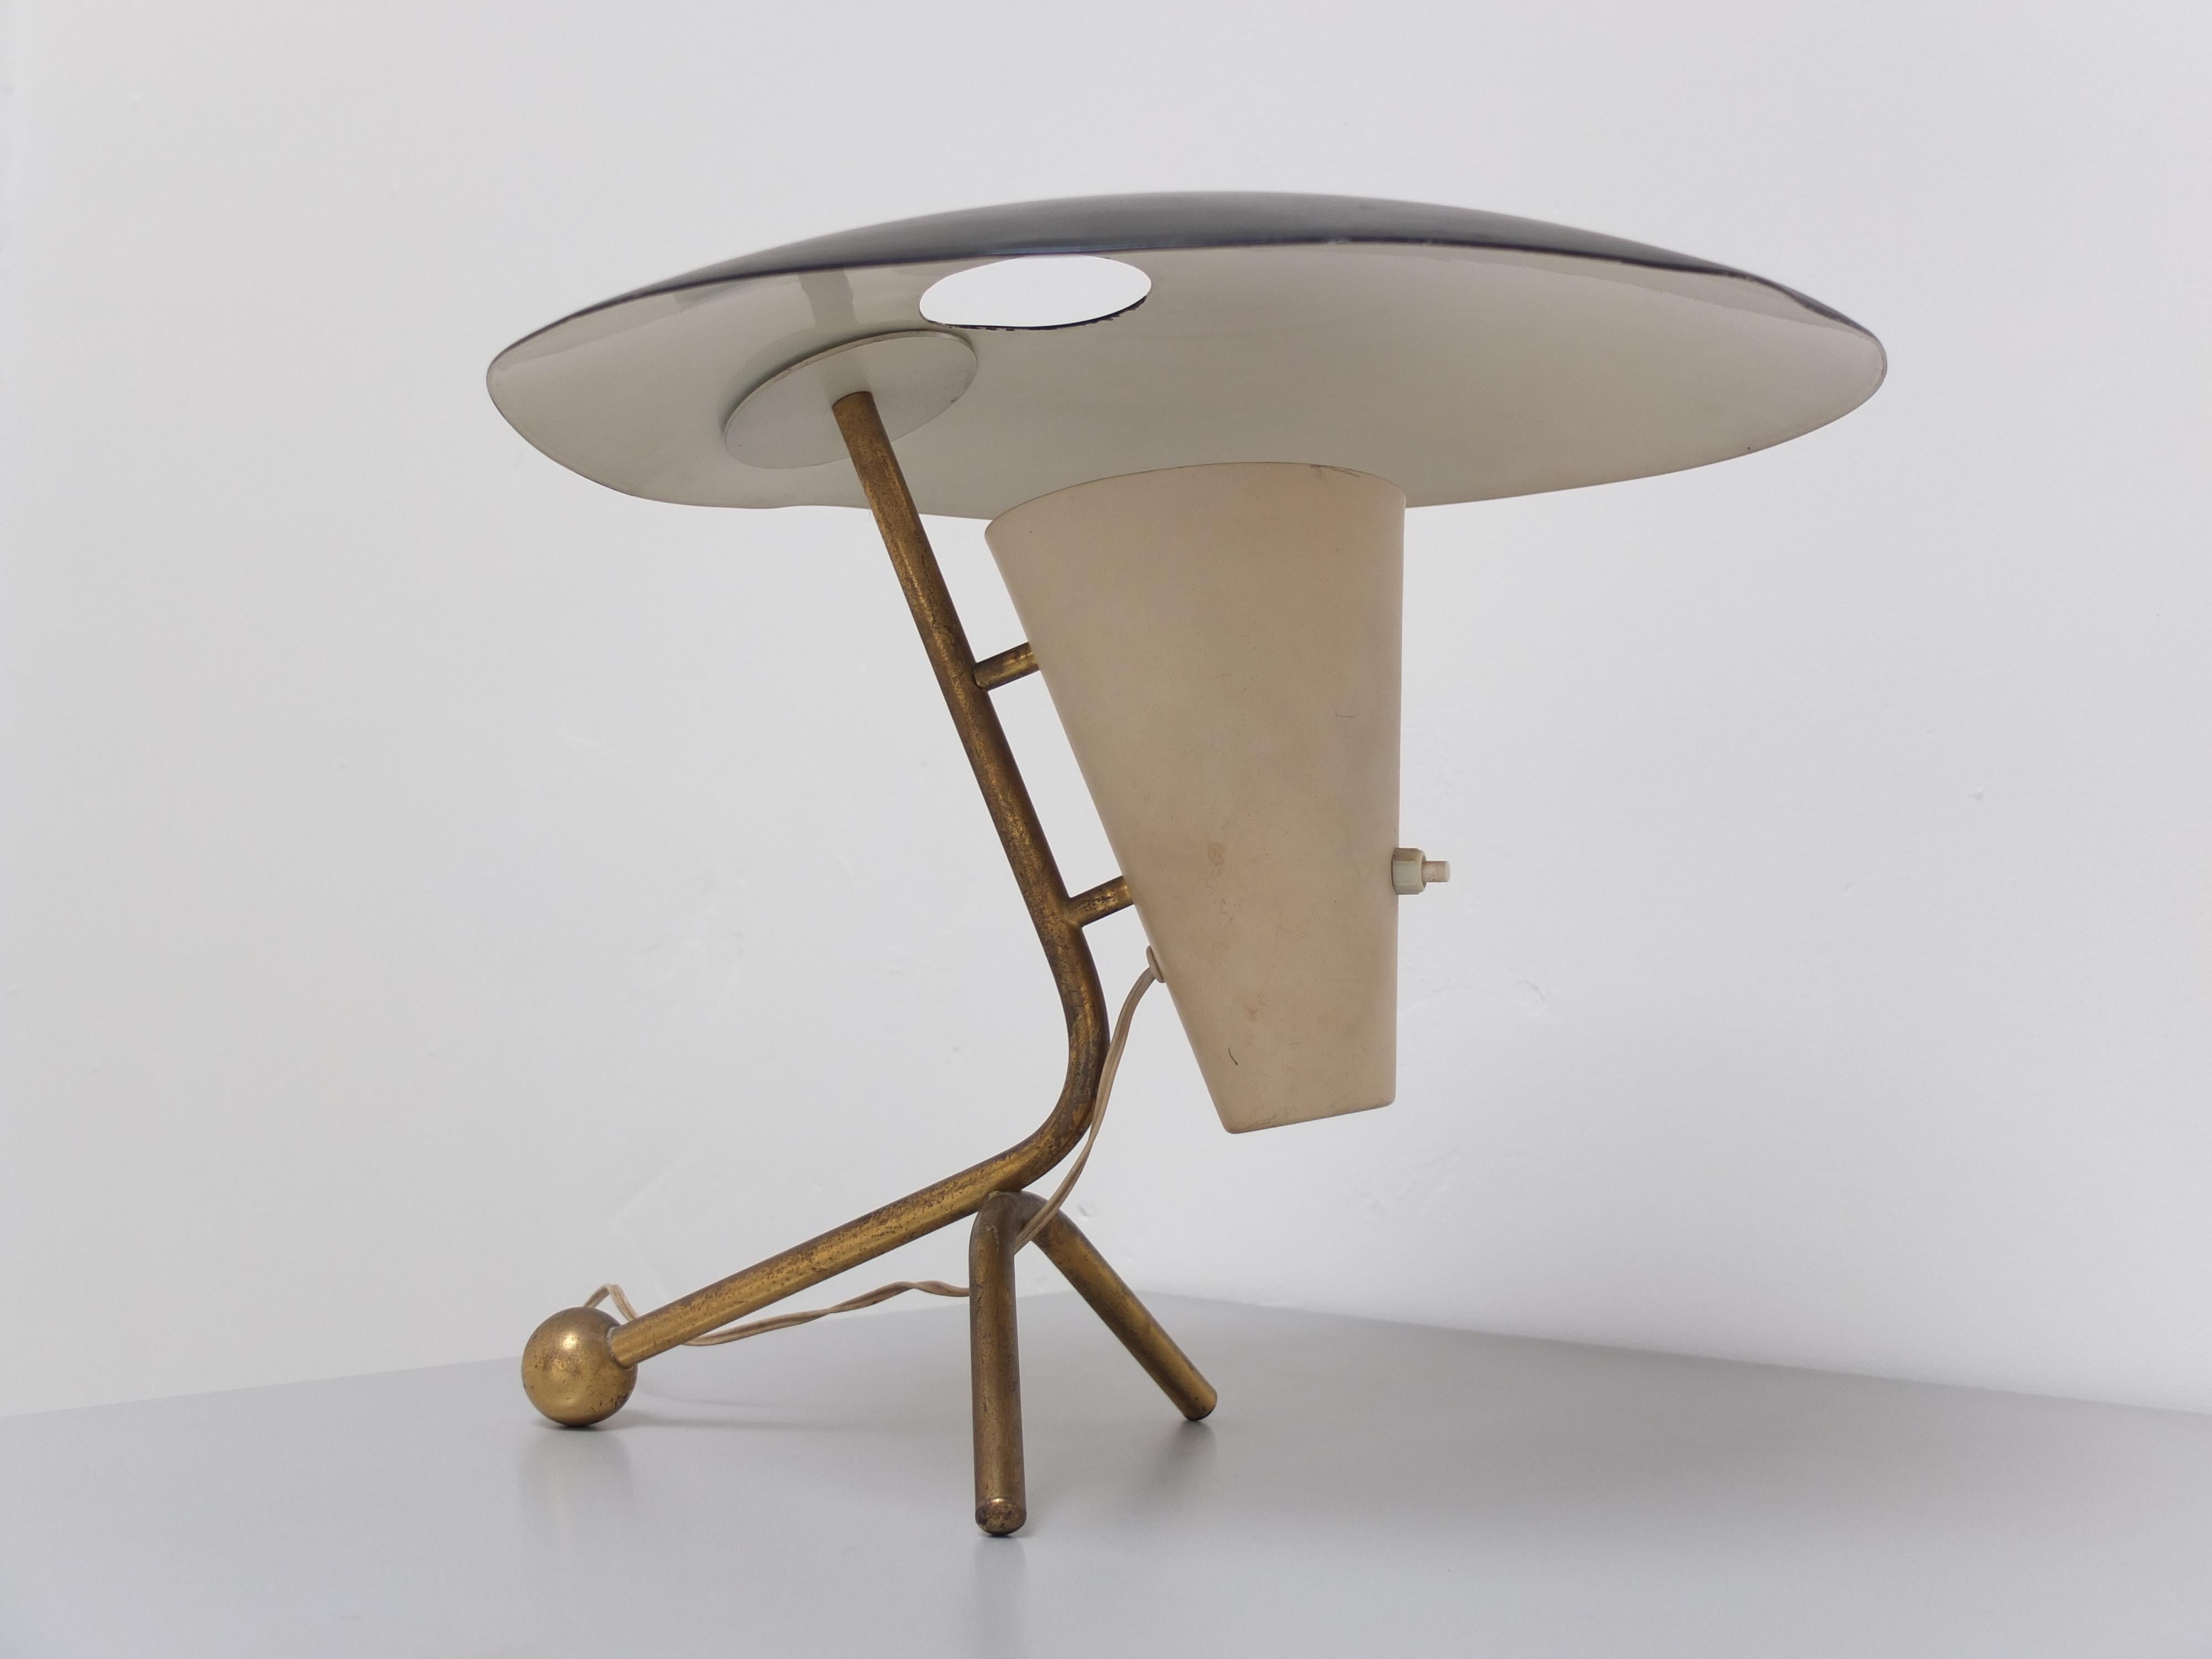 An exceptional desk lamp probably designed by Pierre Guariche for Disderot in 1952. Probably because it resembles a documented model very well but it is not 100% the same. So this could also be a prototype or one-off version. Either way a very